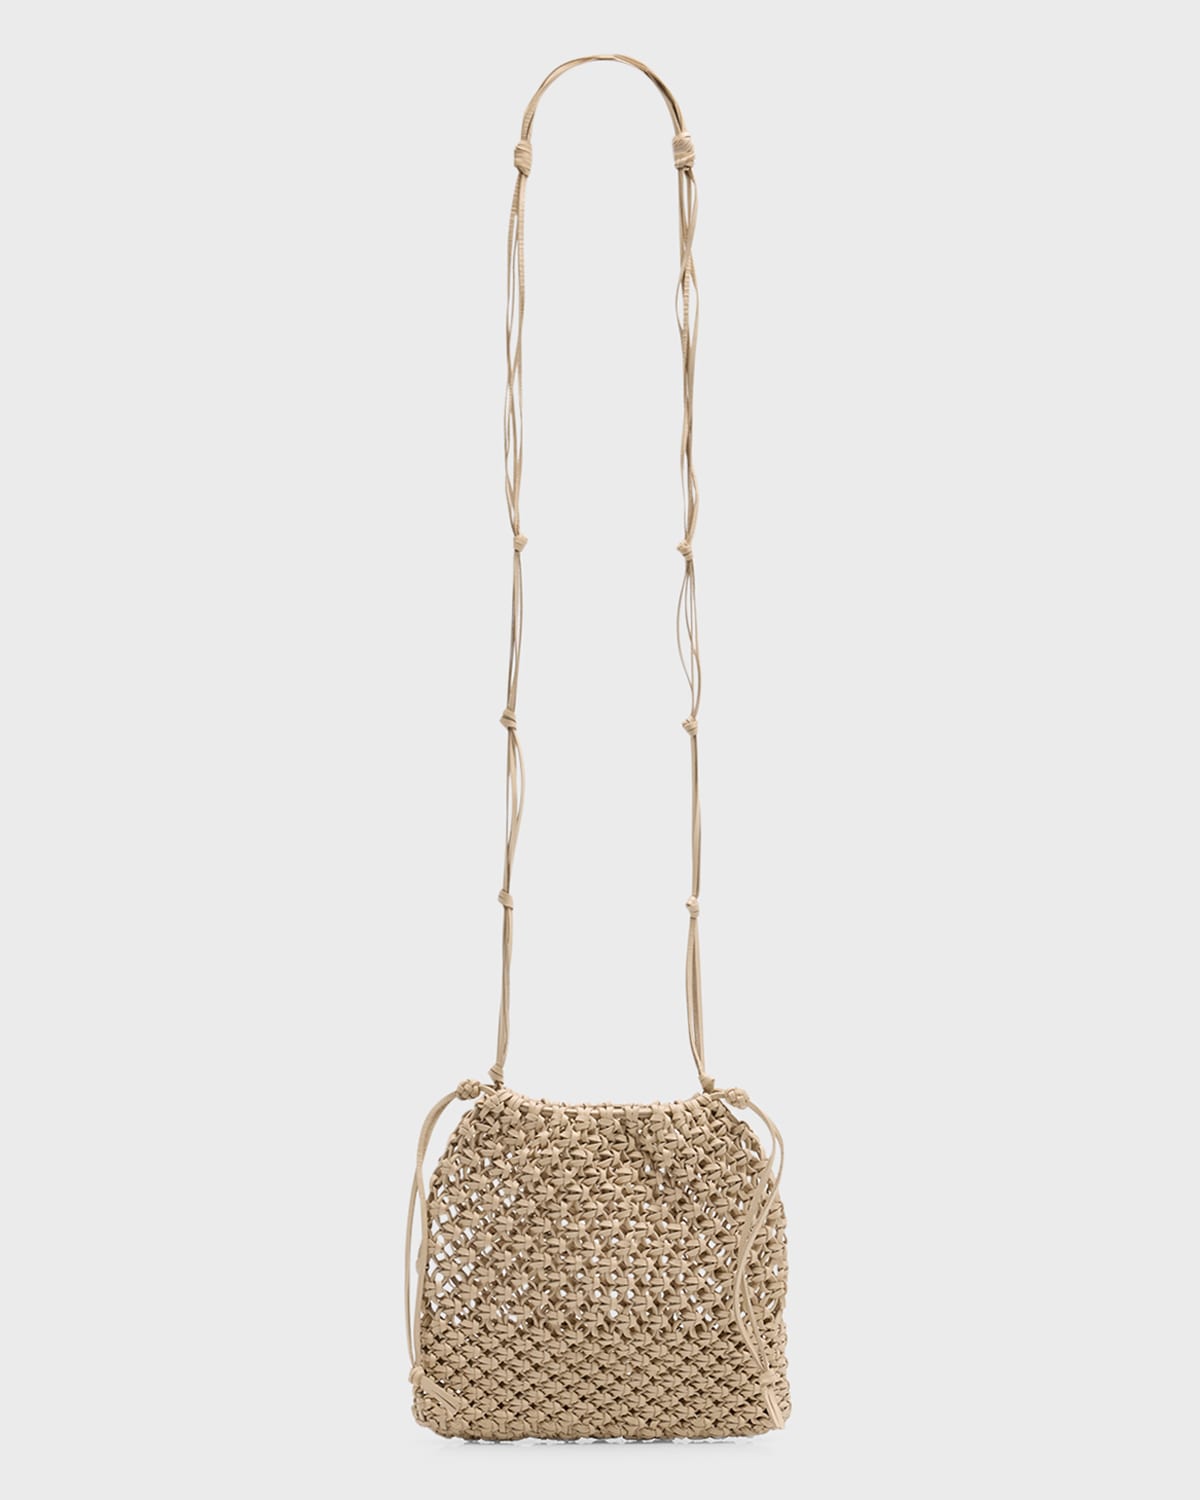 Tulia Knotted Leather Crossbody Bag